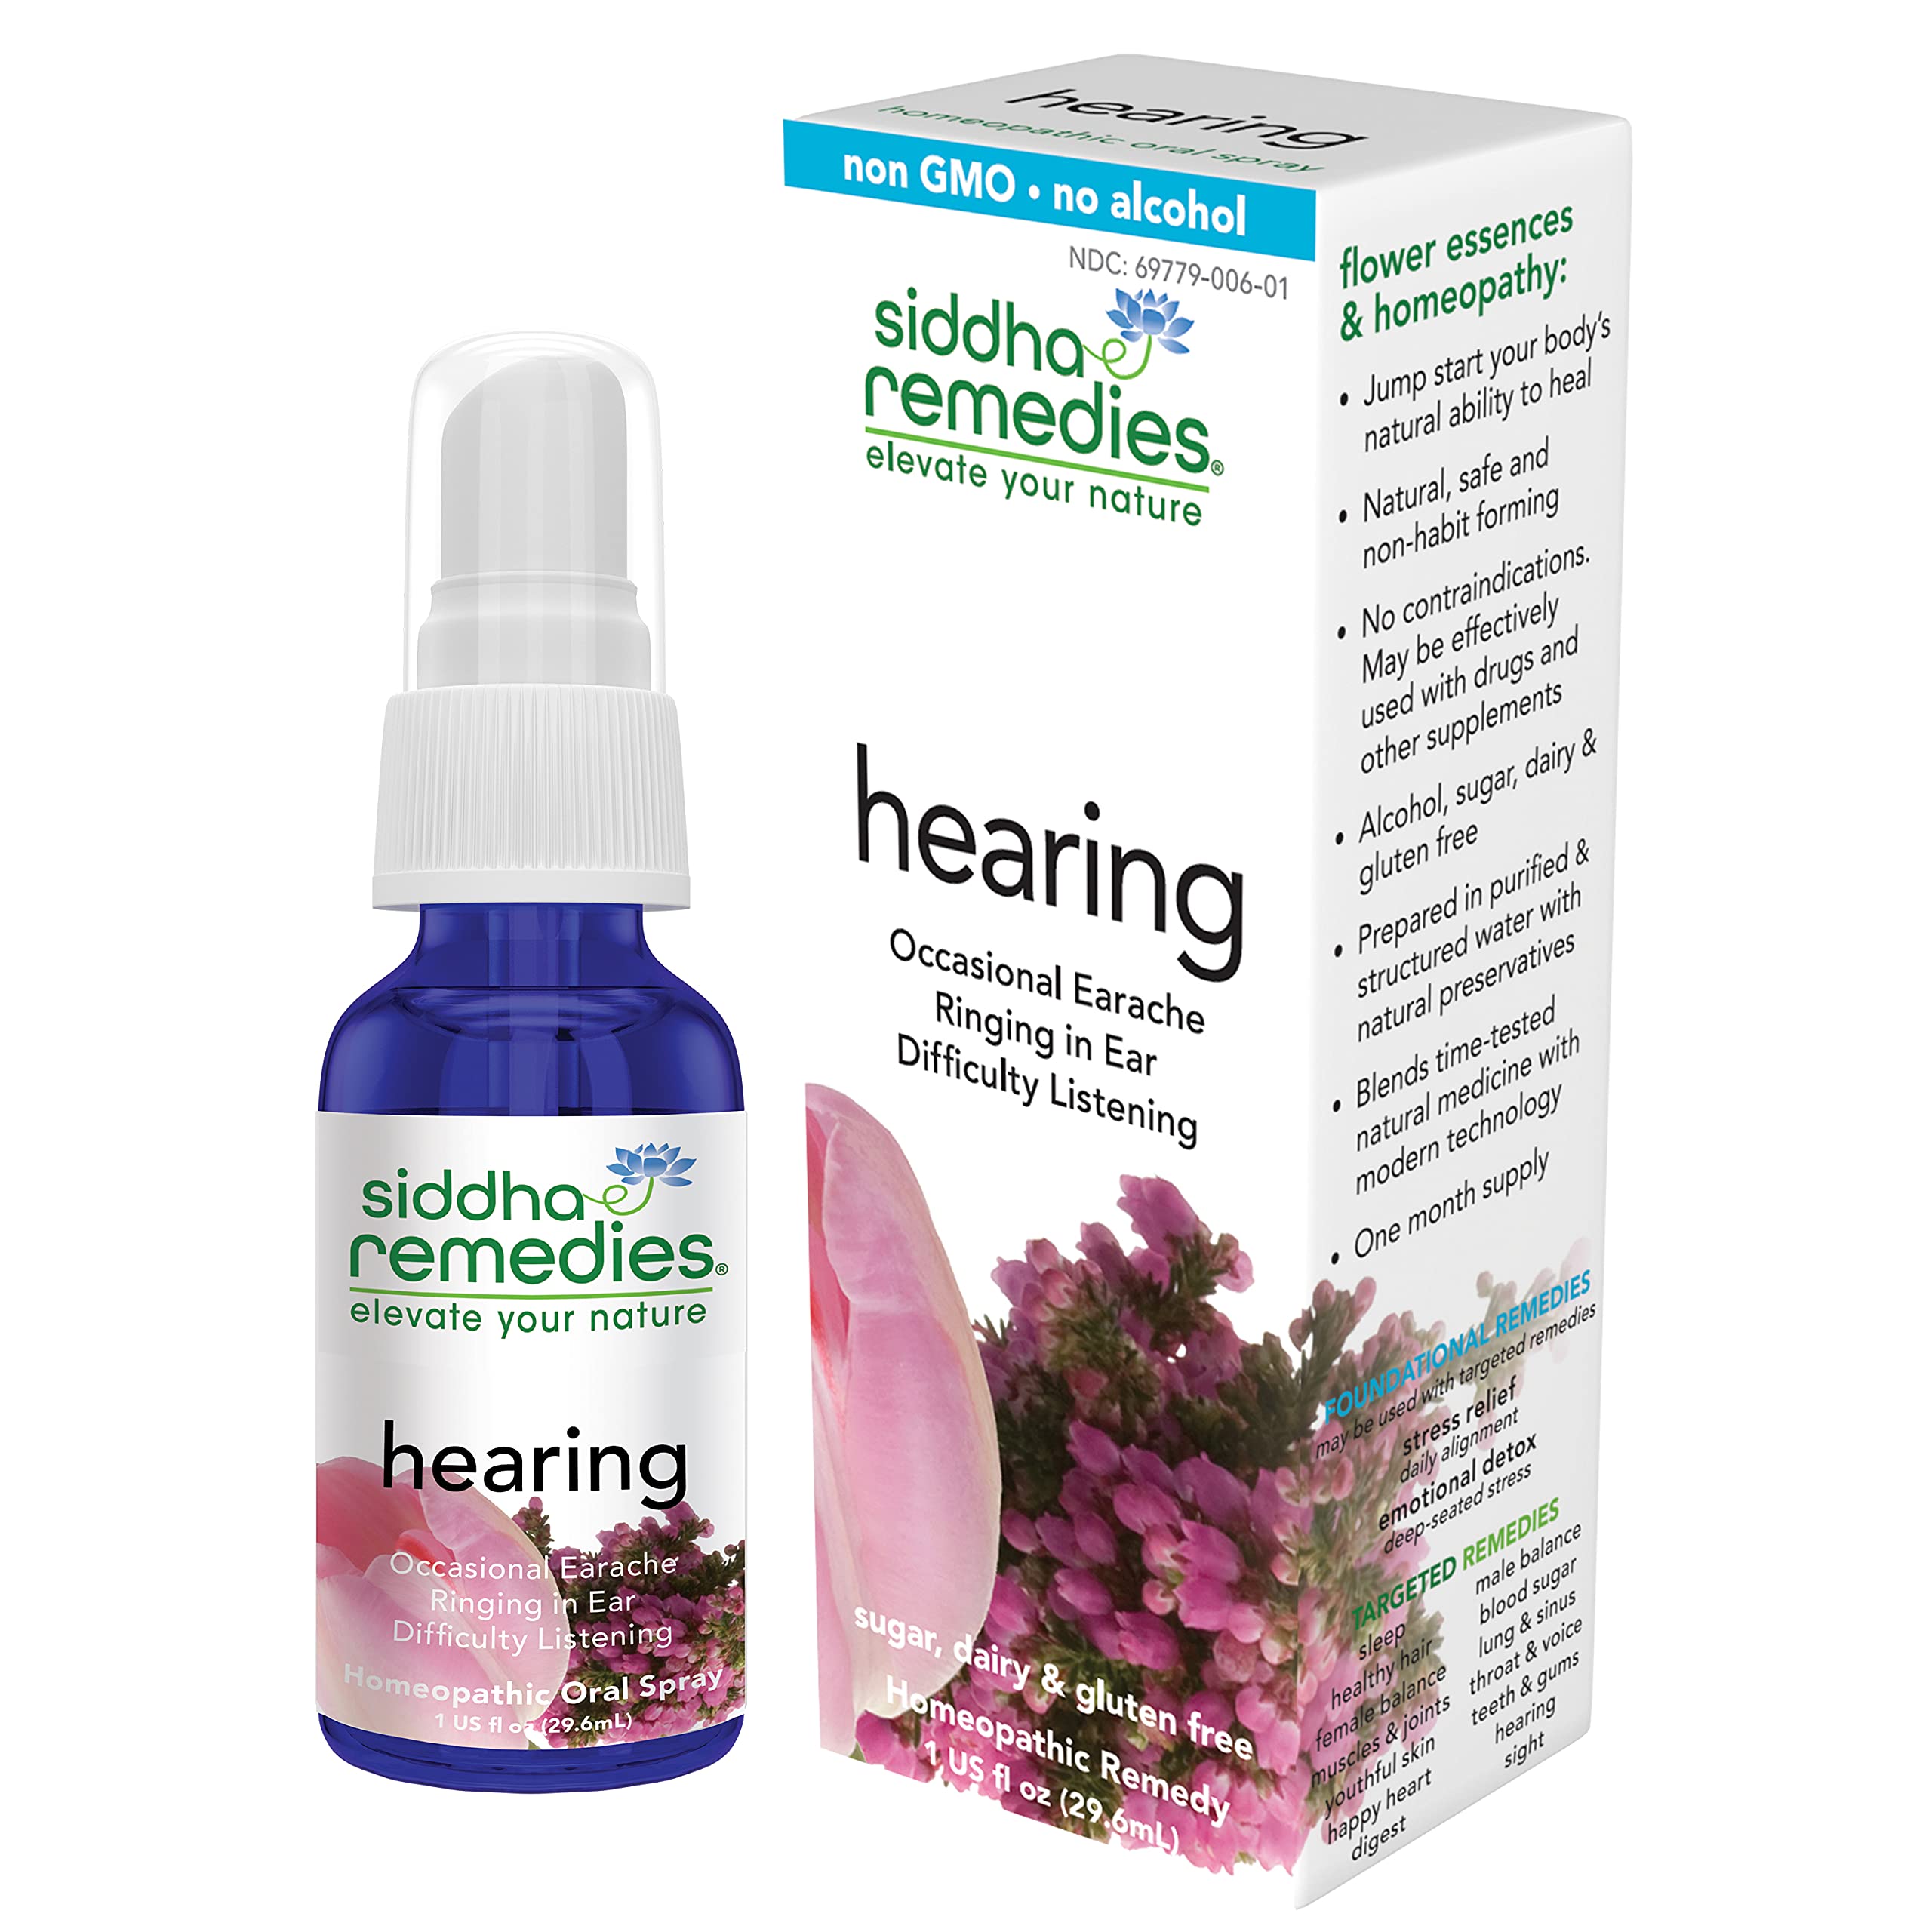 Siddha Remedies Hearing | Ear Ache Medicine for Adult Ear Pain | Homeopathic Medicine for Earache, Ear Ringing, Difficulty Listening & Buzzing in Ear | Non GMO, Alcohol, Gluten, and Sugar Free